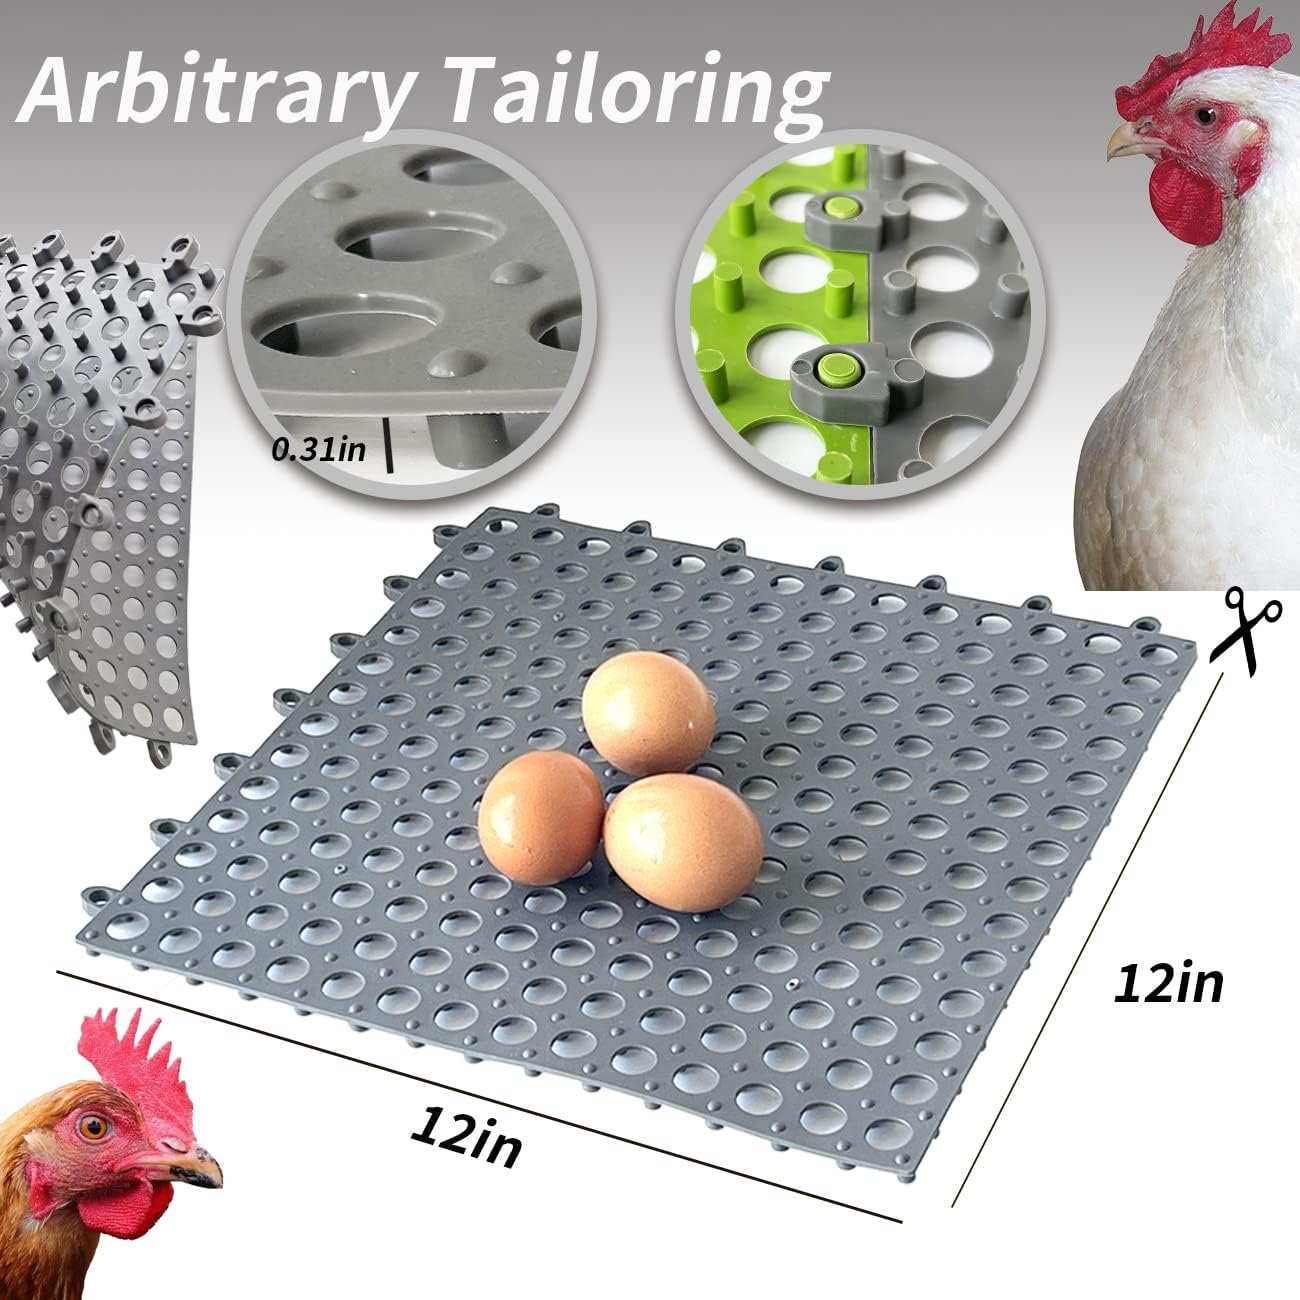 FlidRunest 6Pack Washable Chicken Nesting Pads-Chicken Nesting Box Pads-Durable Chicken Bedding for Coop-Poultry Bedding for Egg Laying Hens-Mats Nesting Box Liners for Chicken Coops (Grey)